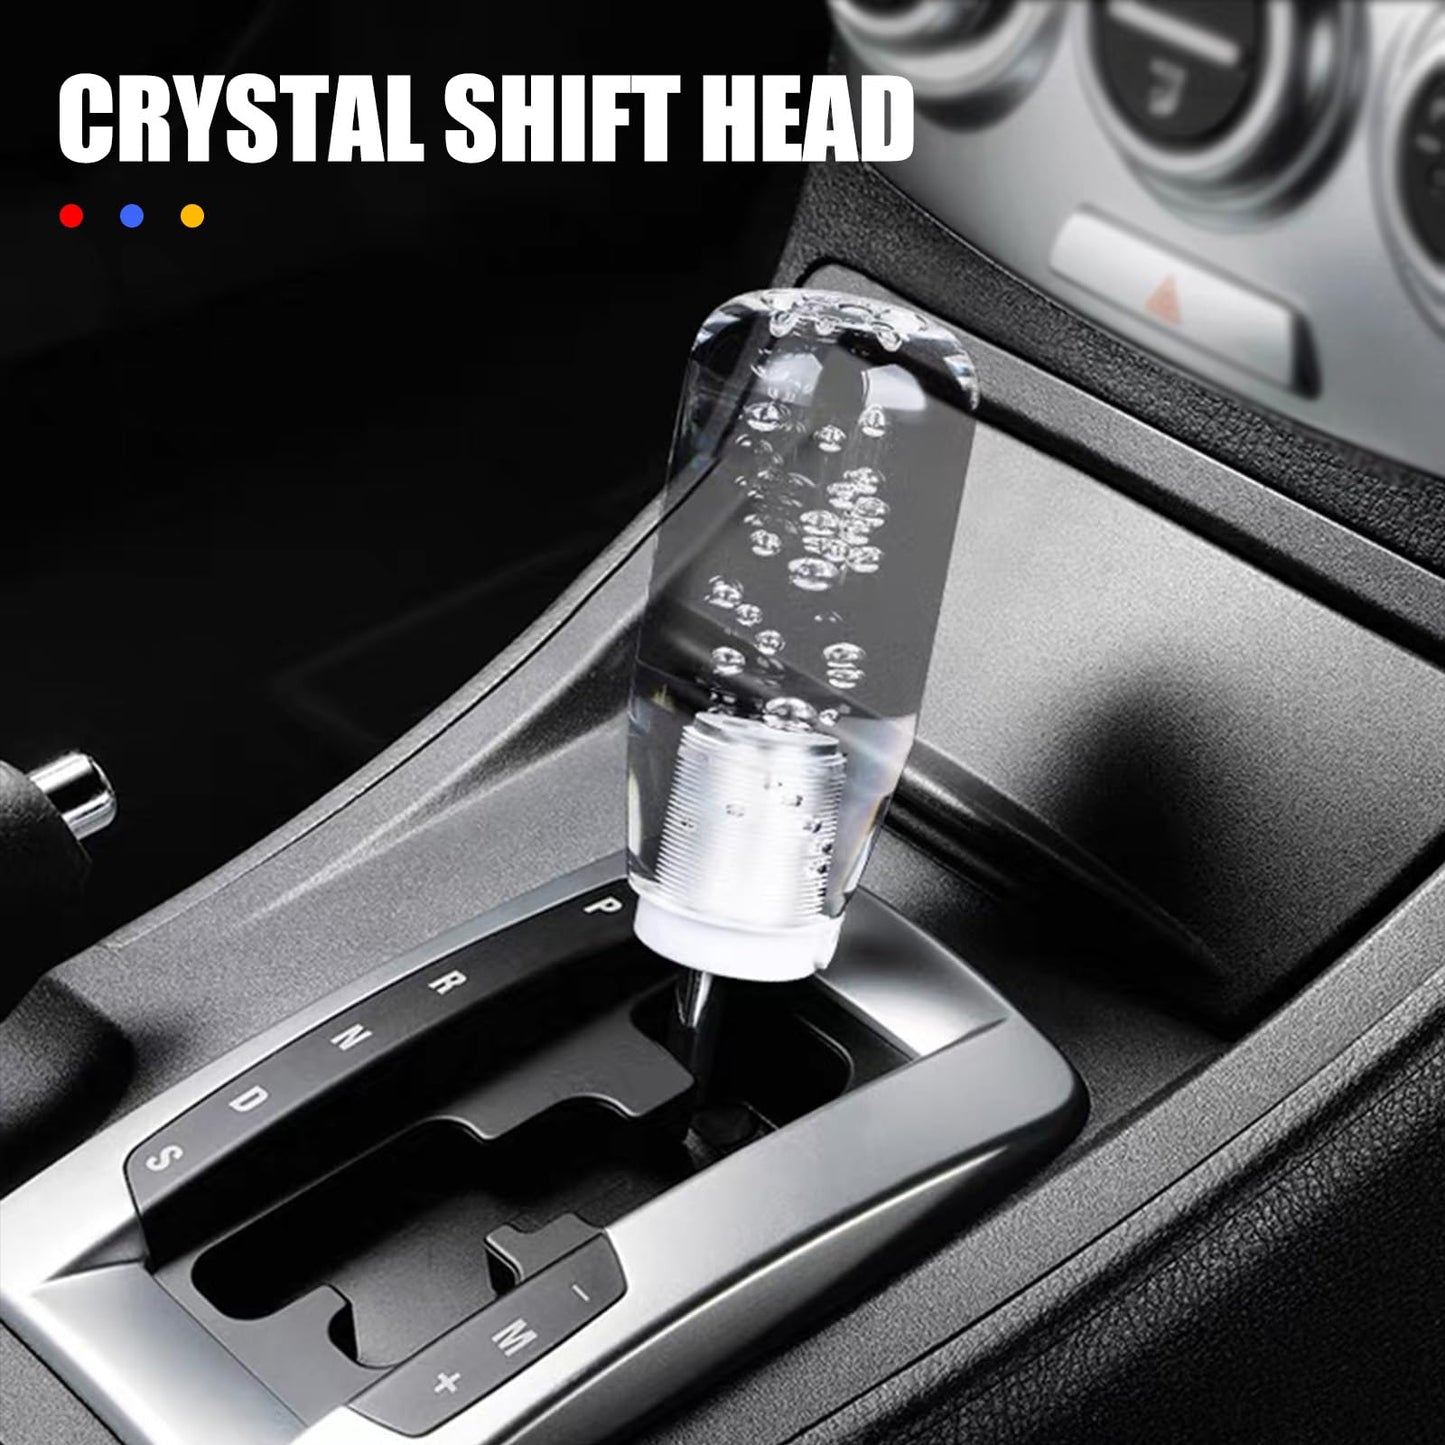 LED Luminous Crystal Gear Shifter with Colorful Lights